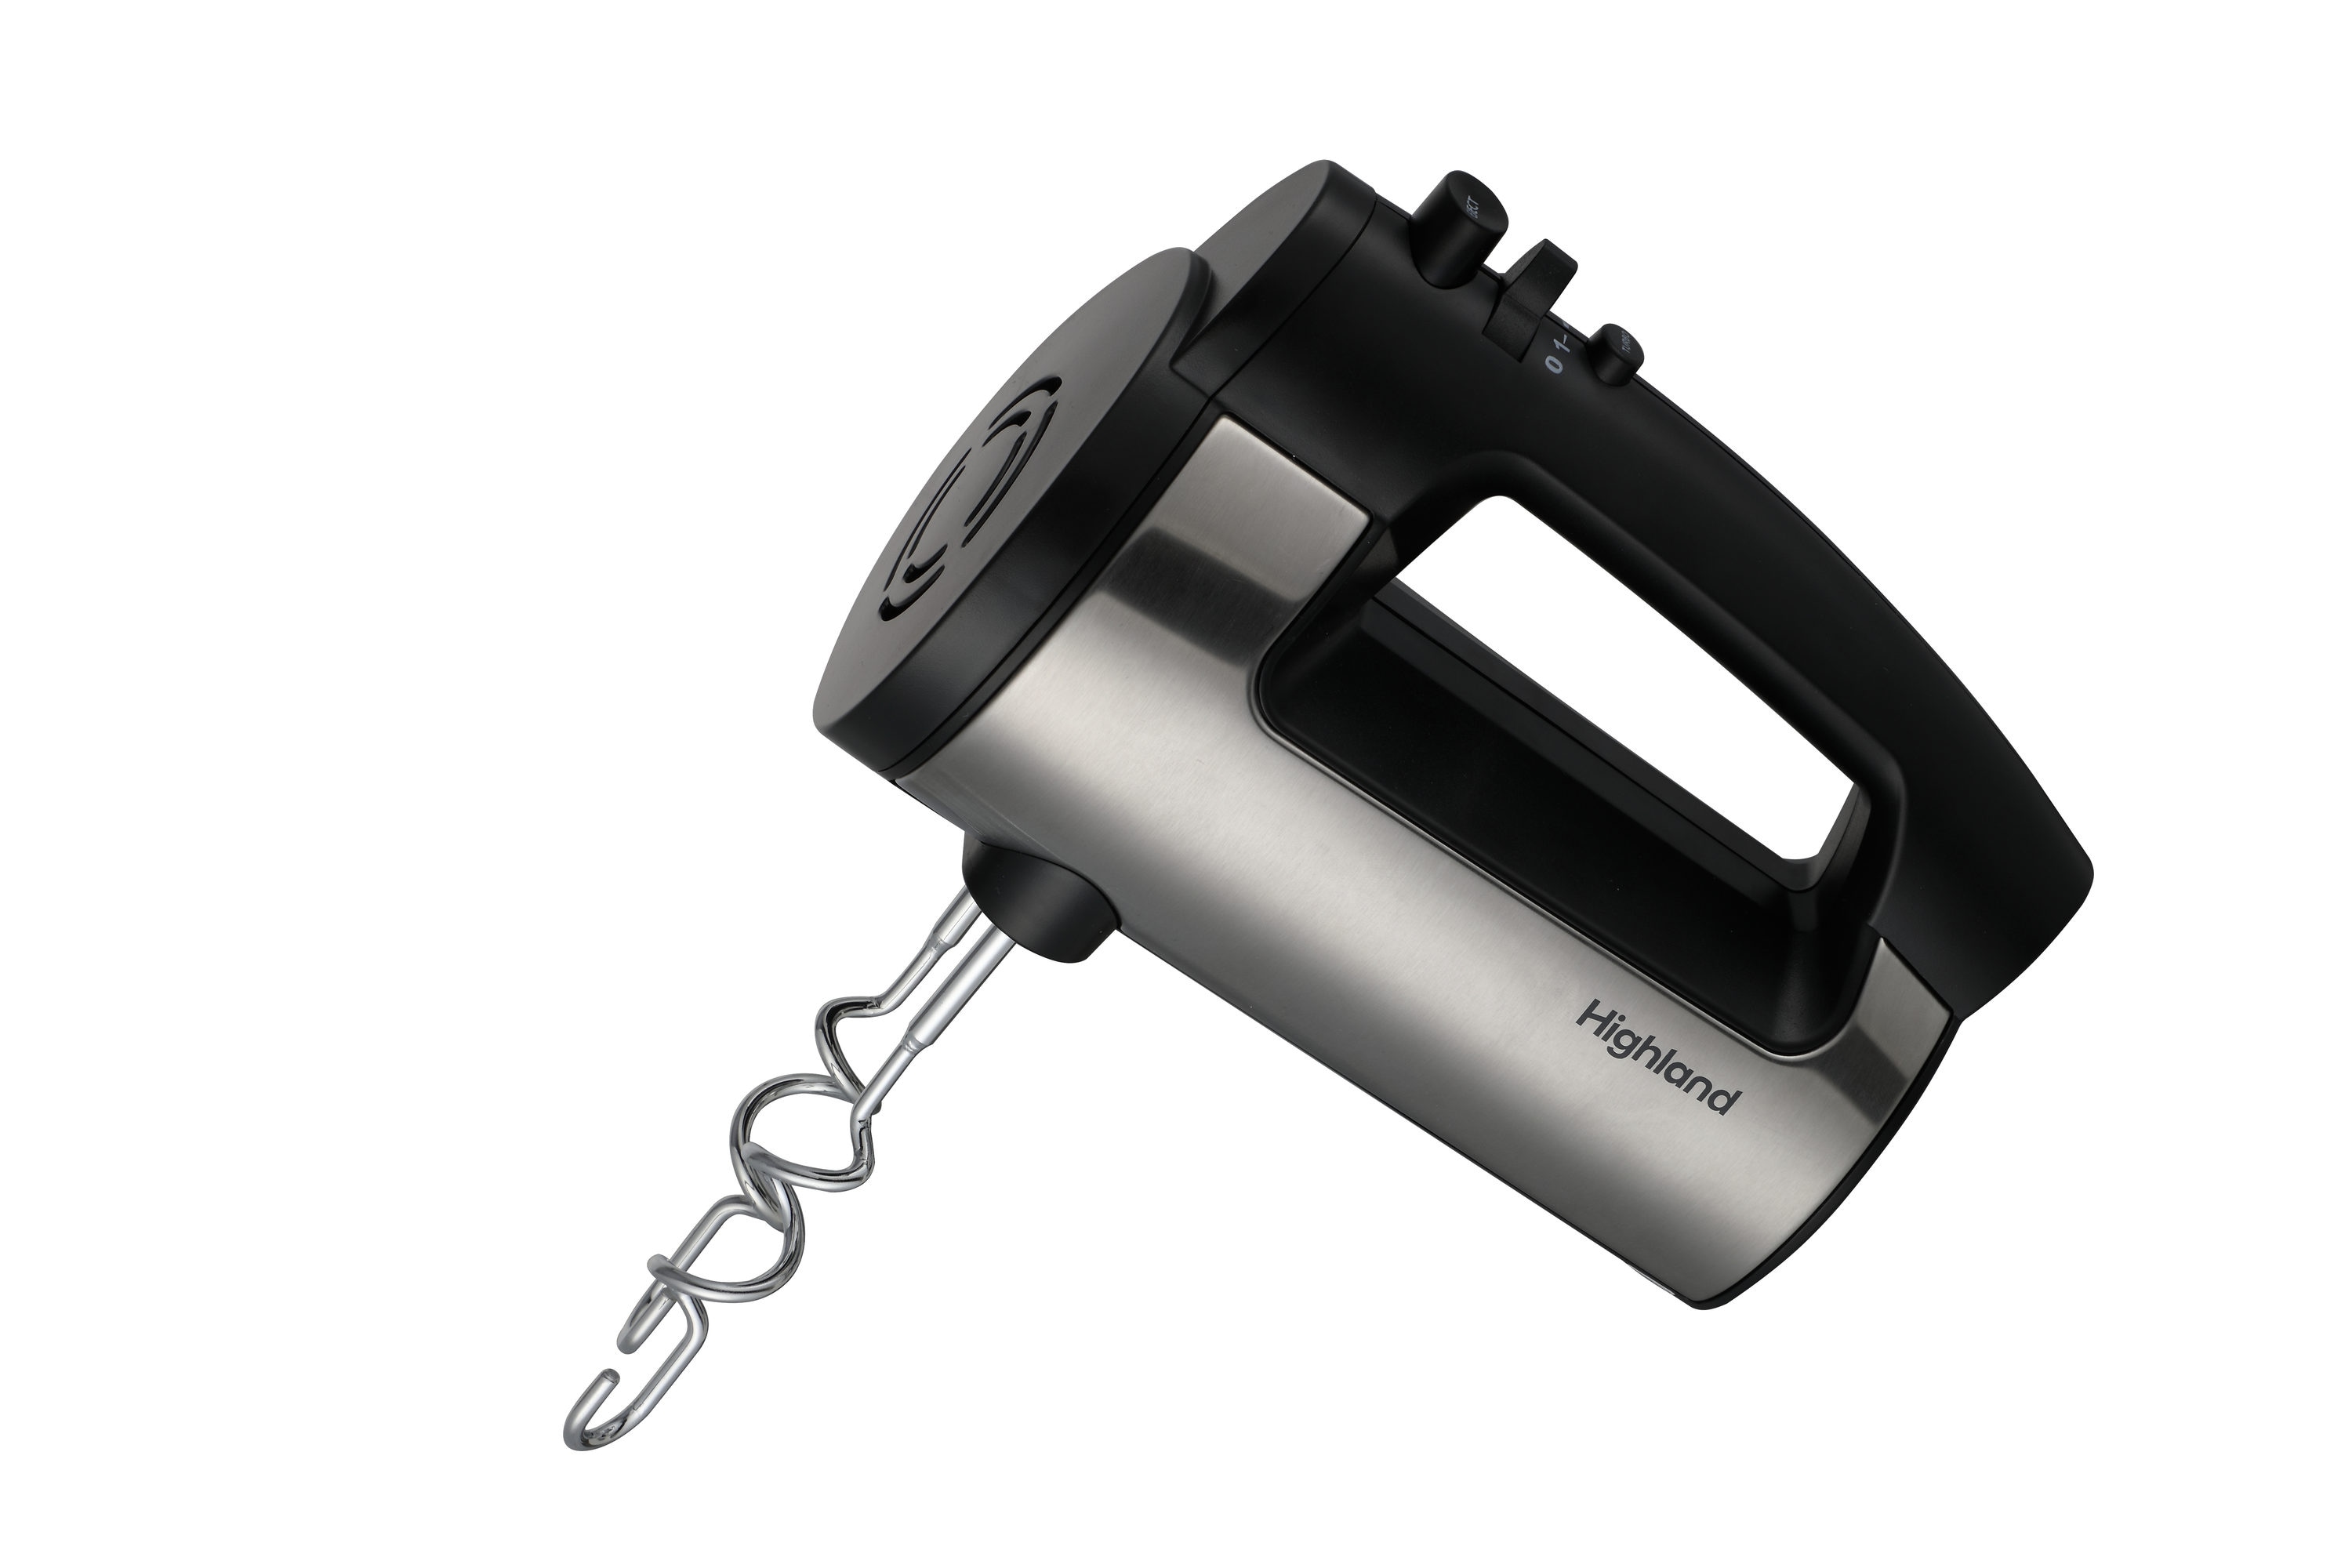 Highland Hand mixer 59.06-in Cord 6-Speed Stainless Steel Hand